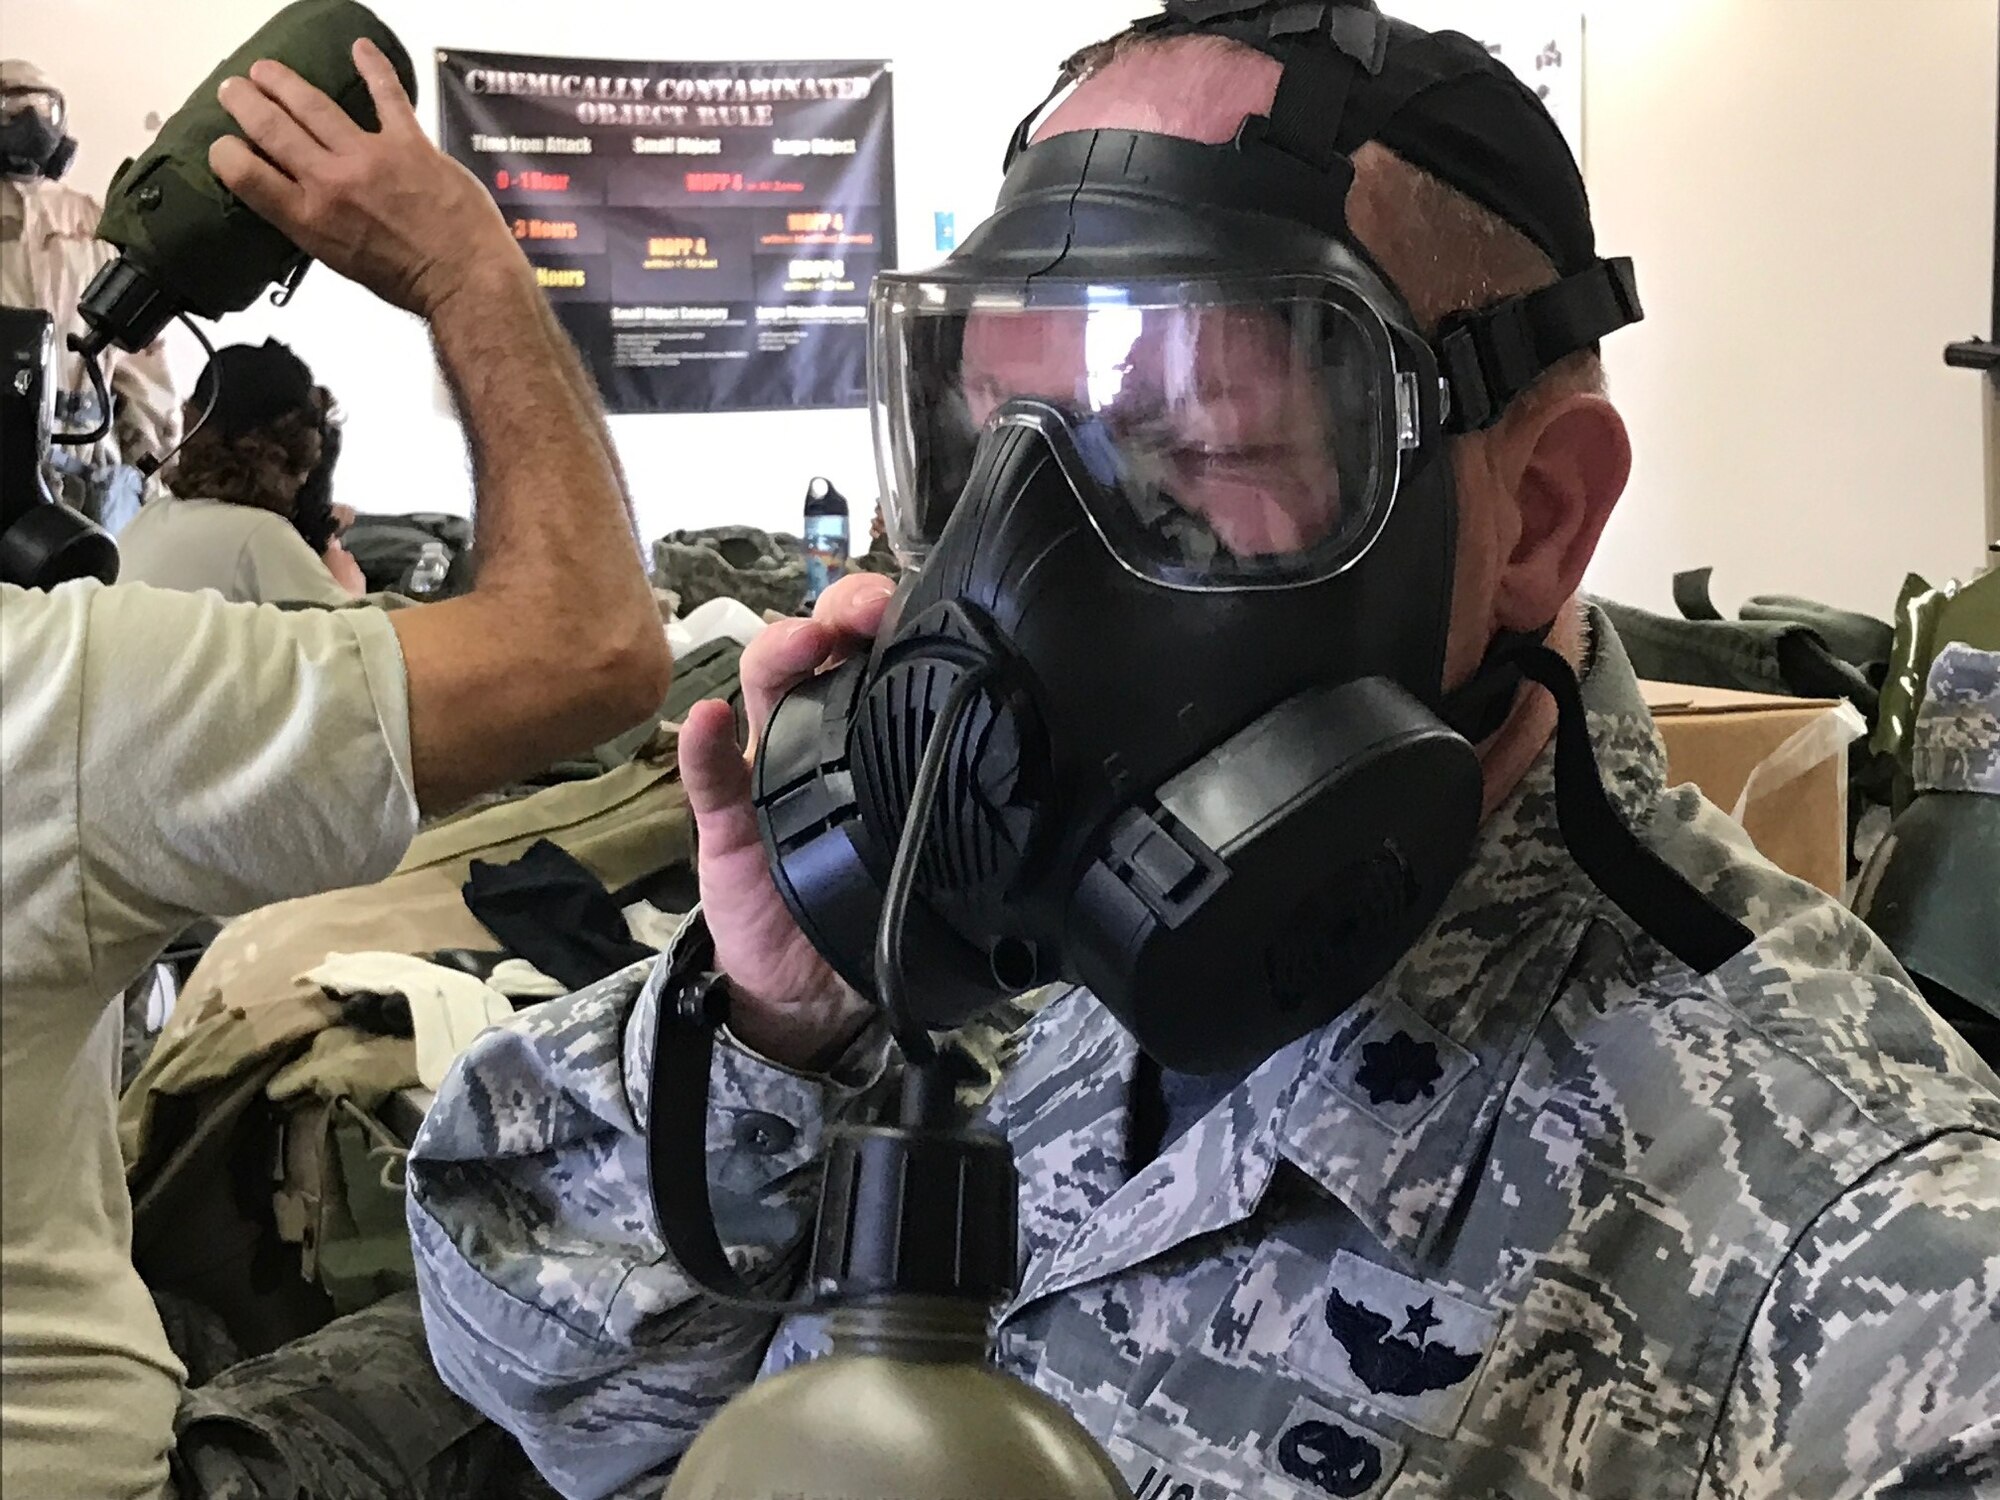 Lt. Col. Joshua Flatley, 940th Operations Support Squadron commander, drinks through his M50 gas mask during chemical, biological, radiological, nuclear, and high-yield explosives training at Beale Air Force Base, California Aug. 12, 2017. This training prepares Citizen Airmen to survive and work in a hostile environments. (U.S. Air Force photo by Staff Sgt. Brenda H. Davis/Released)